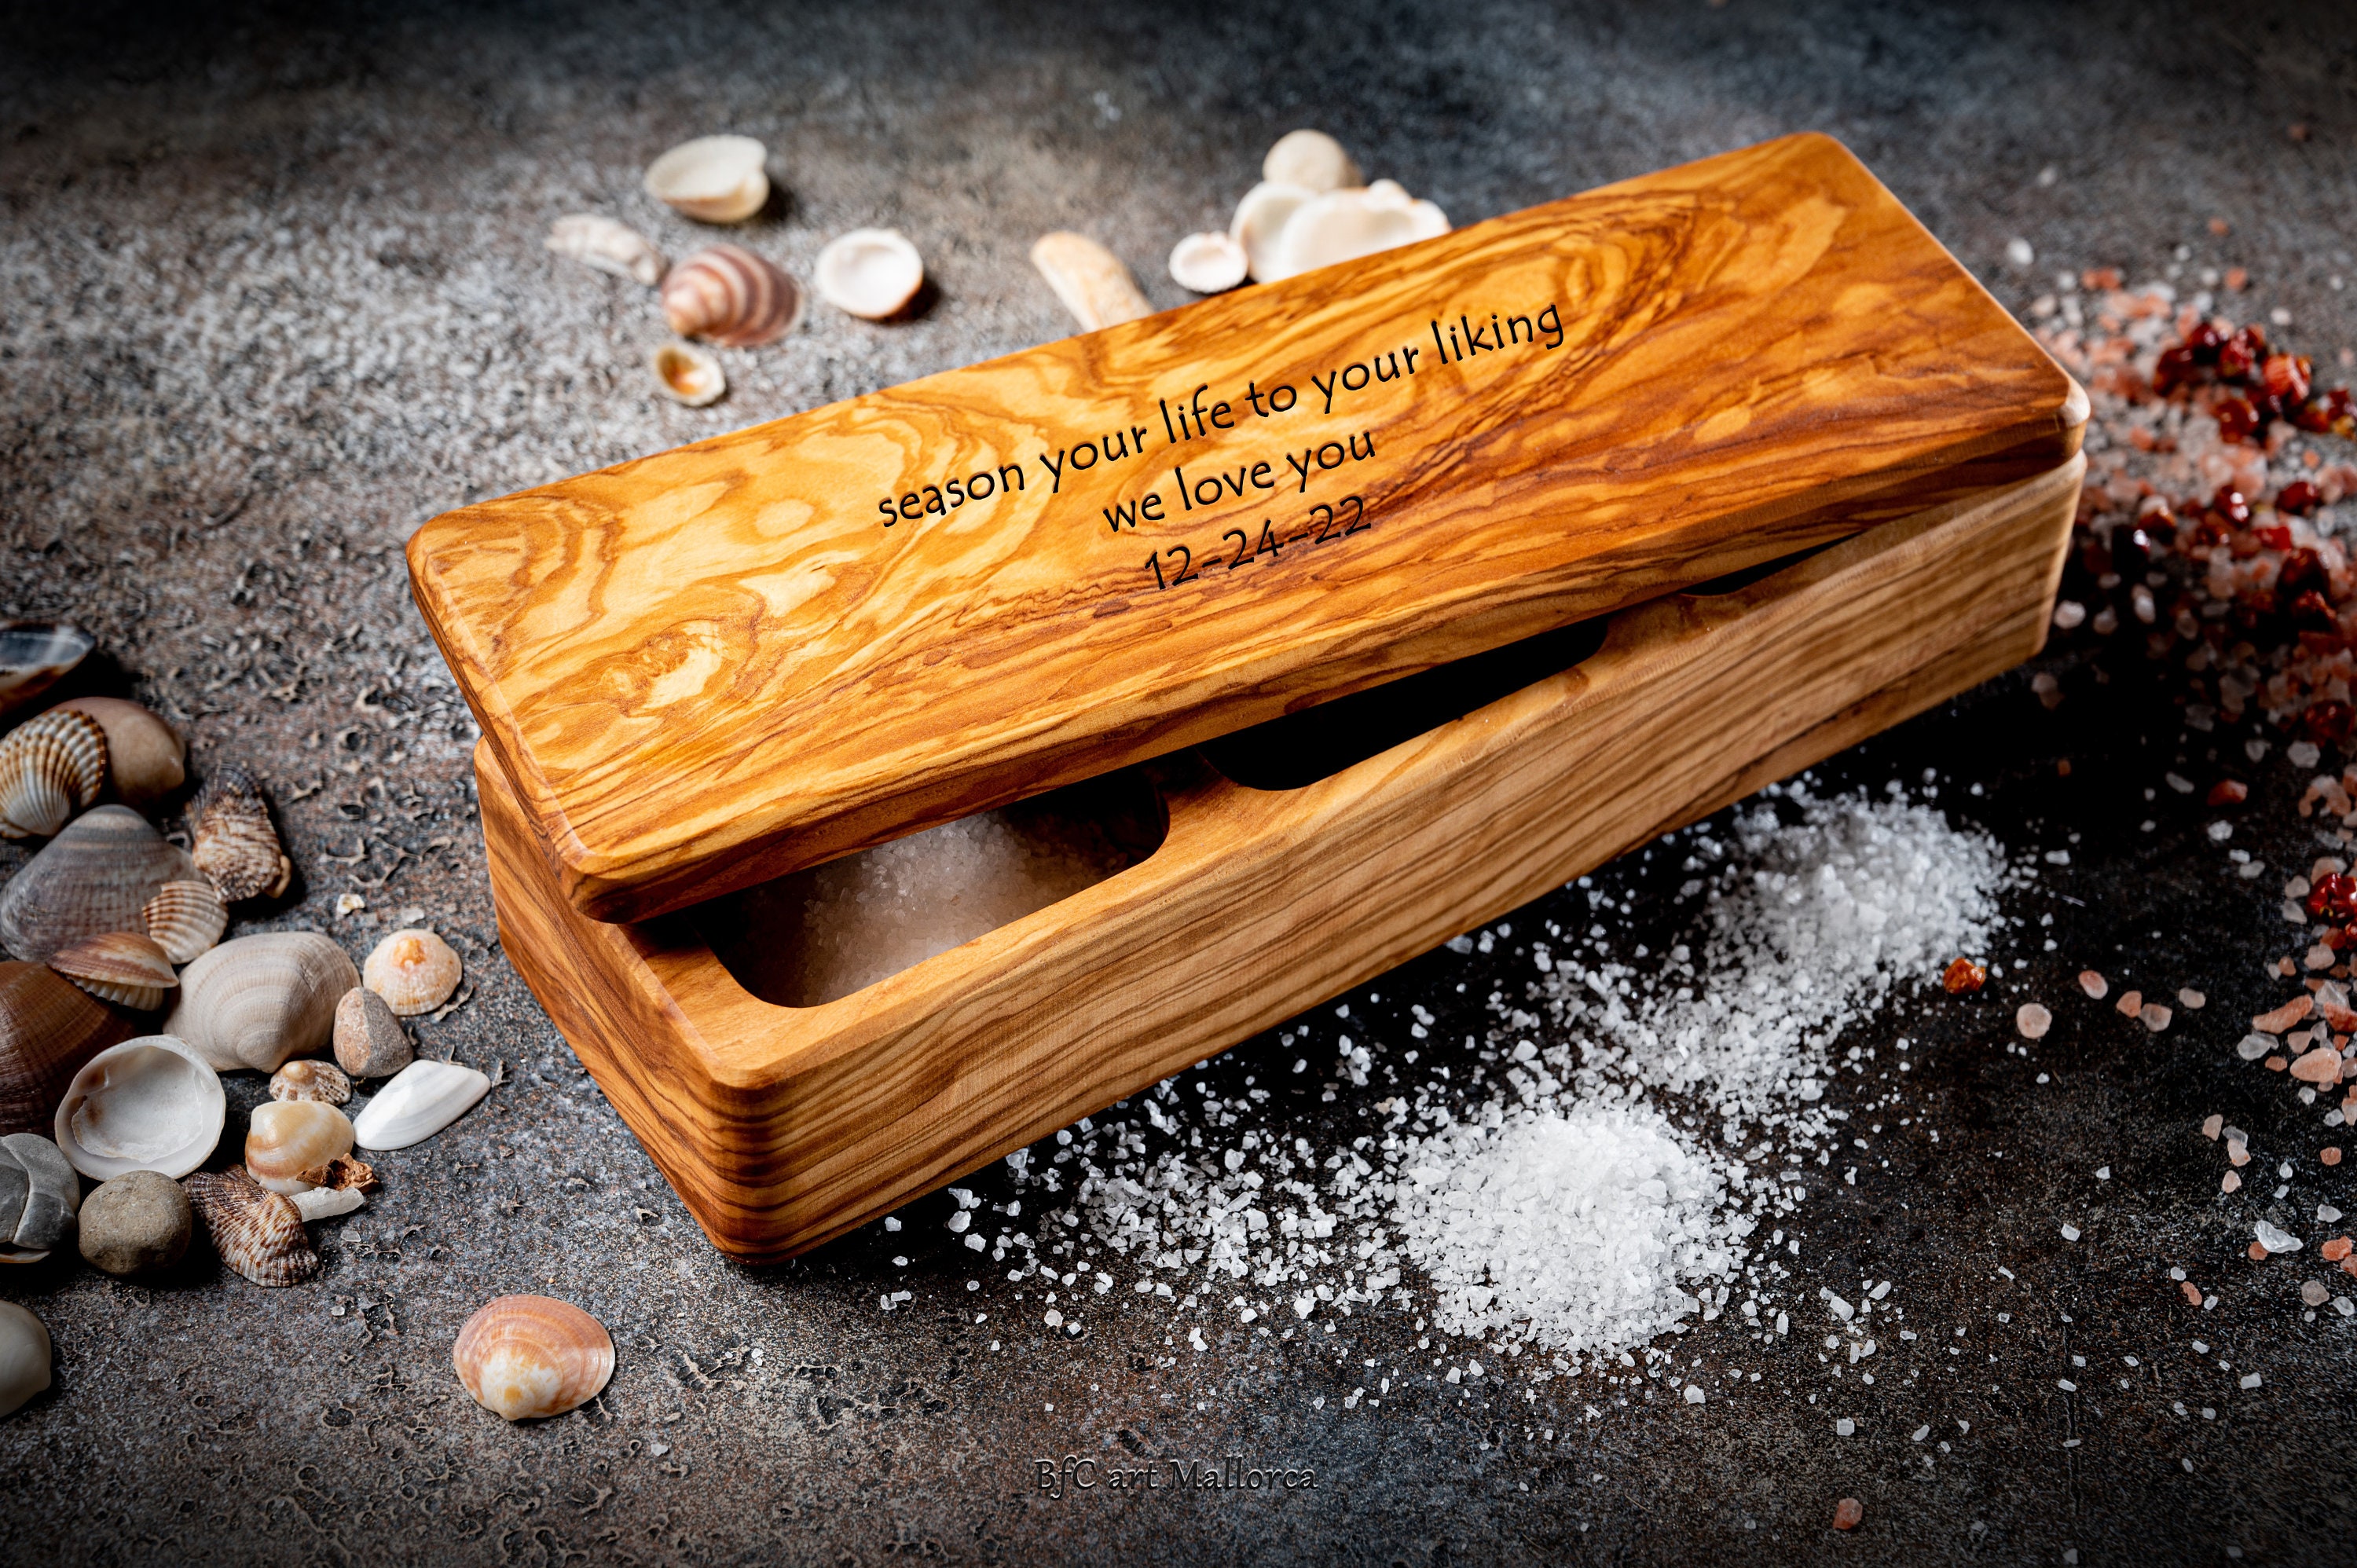 Salt Box with Magnetic Swivel Lid, Take Life with a Grain of Salt  Engraving on Lid